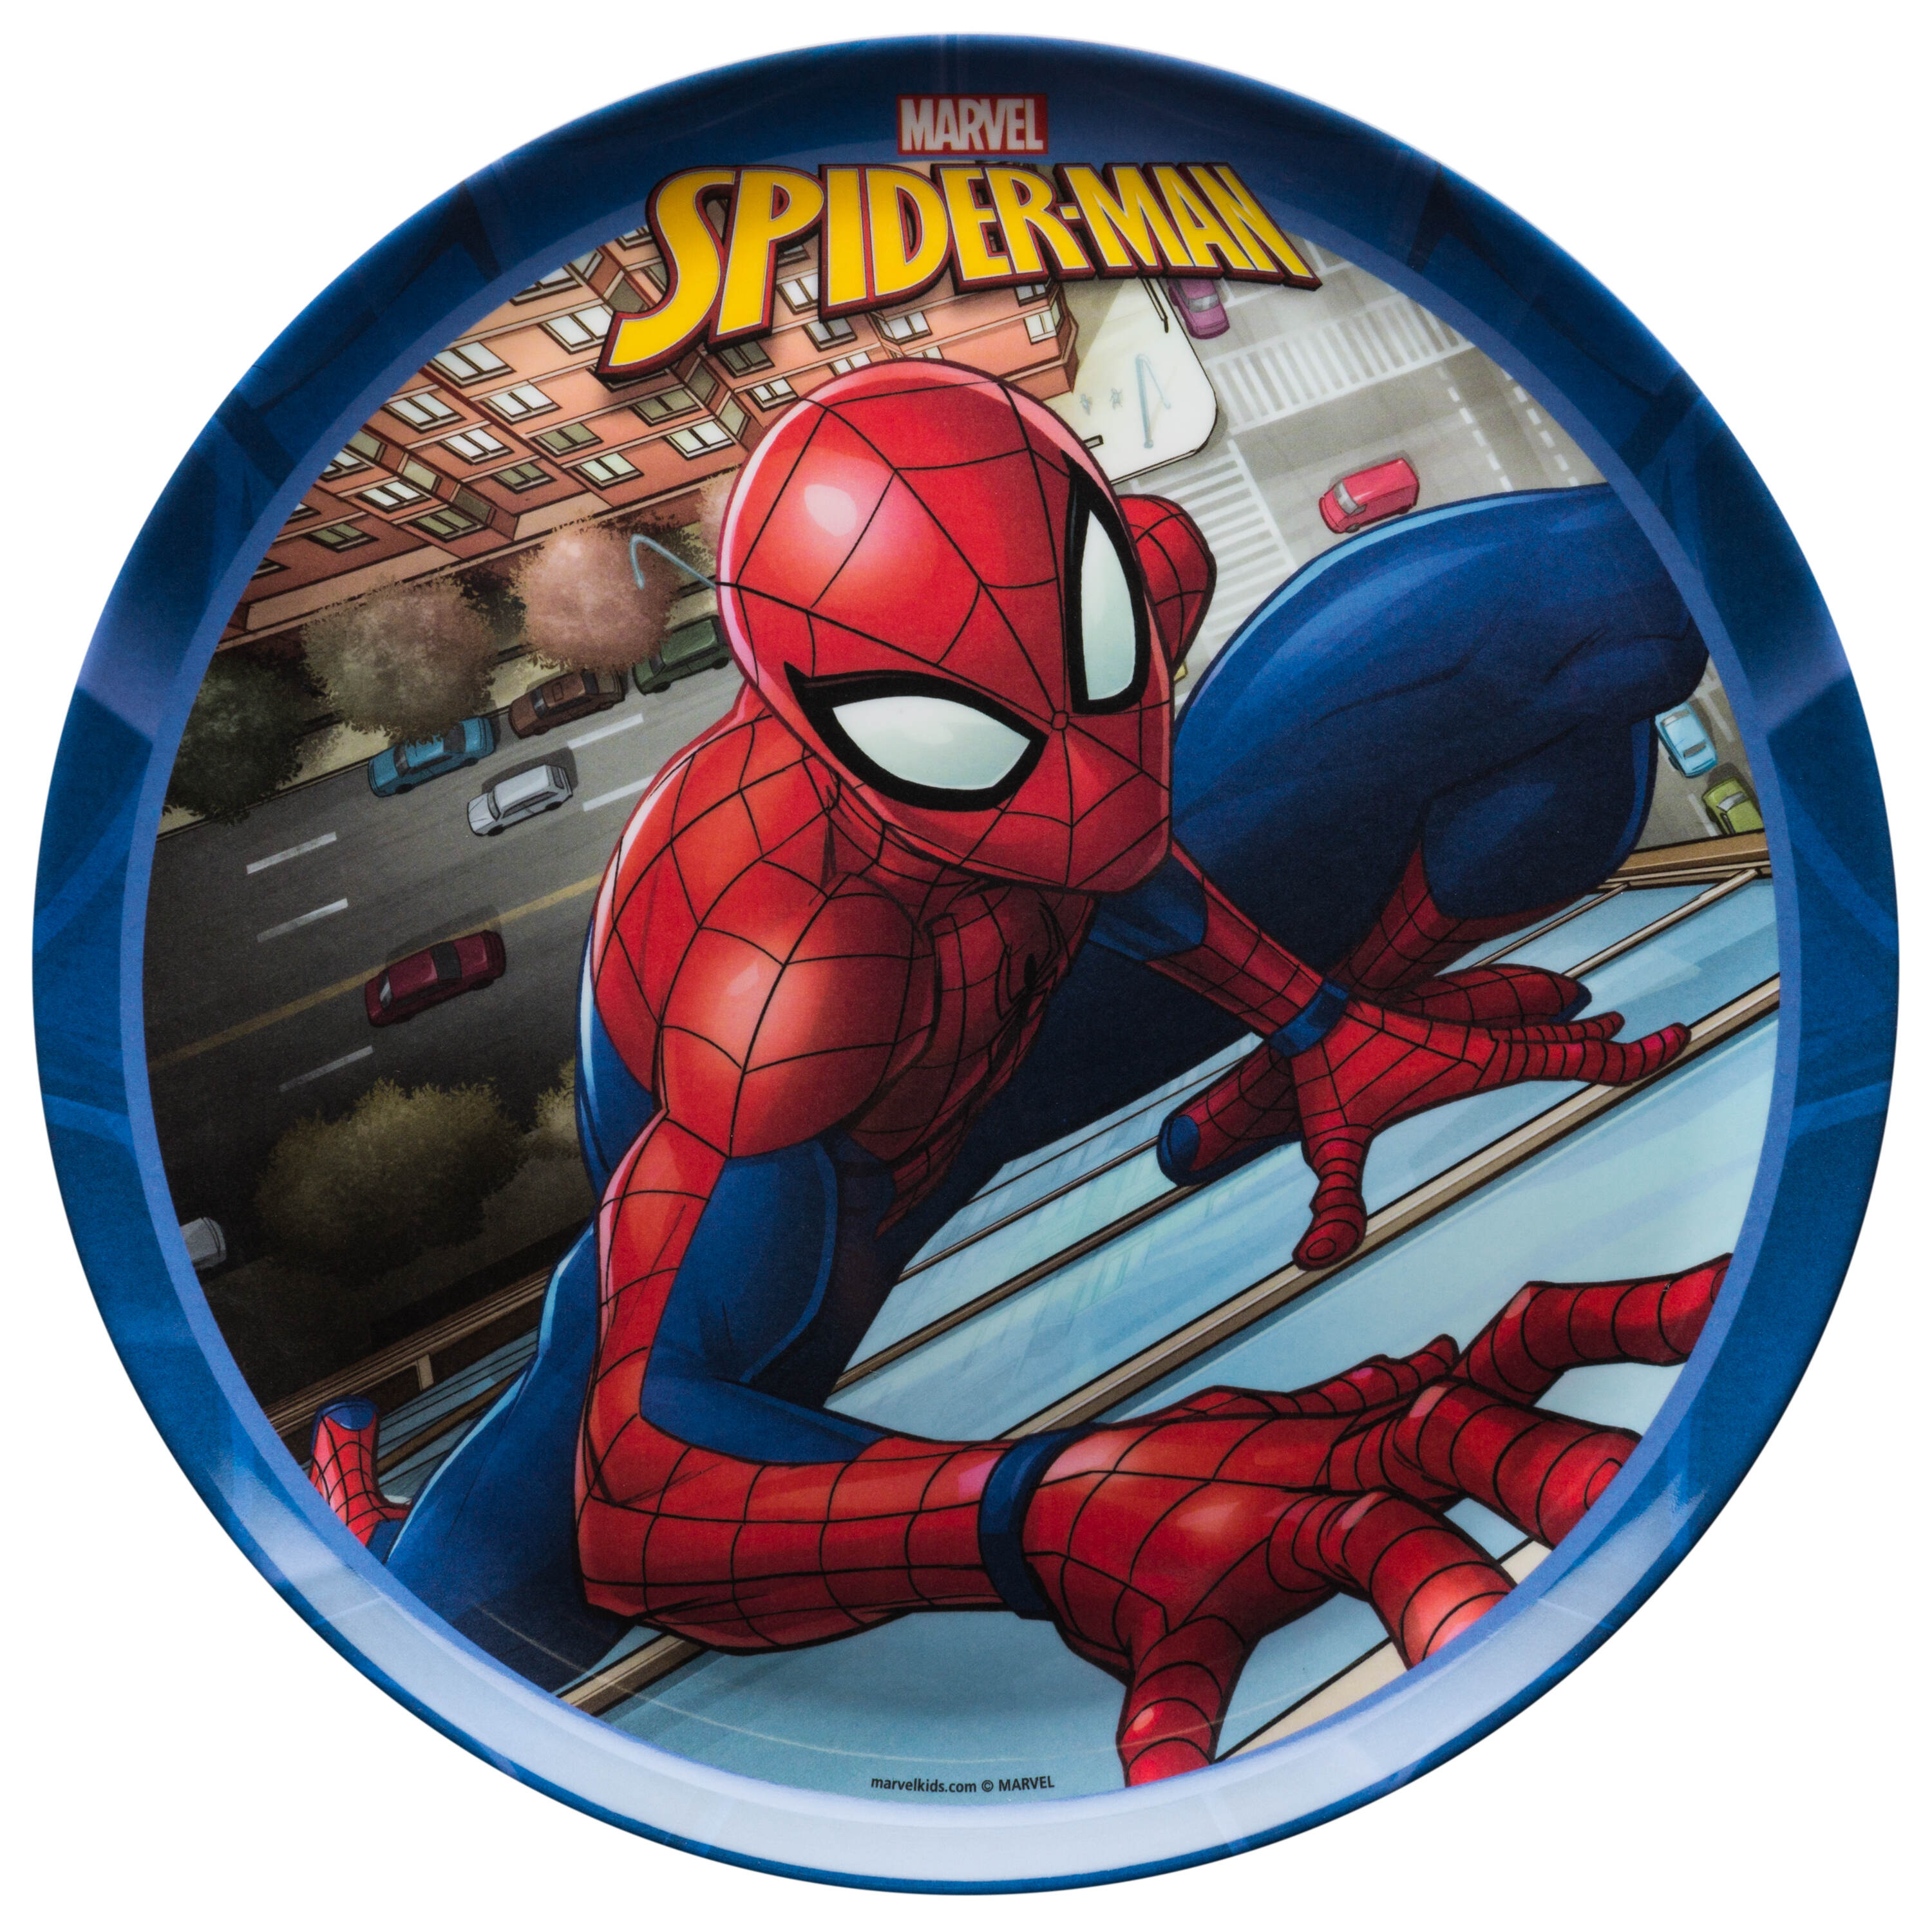 Spiderman Spidey and His Amazing Friends Dinnerware Drinkware 5pc Water Bottle and Utensil Tableware Zak Designs Marvel Spider-Man 5 Piece Set Includes Plate Bowl 